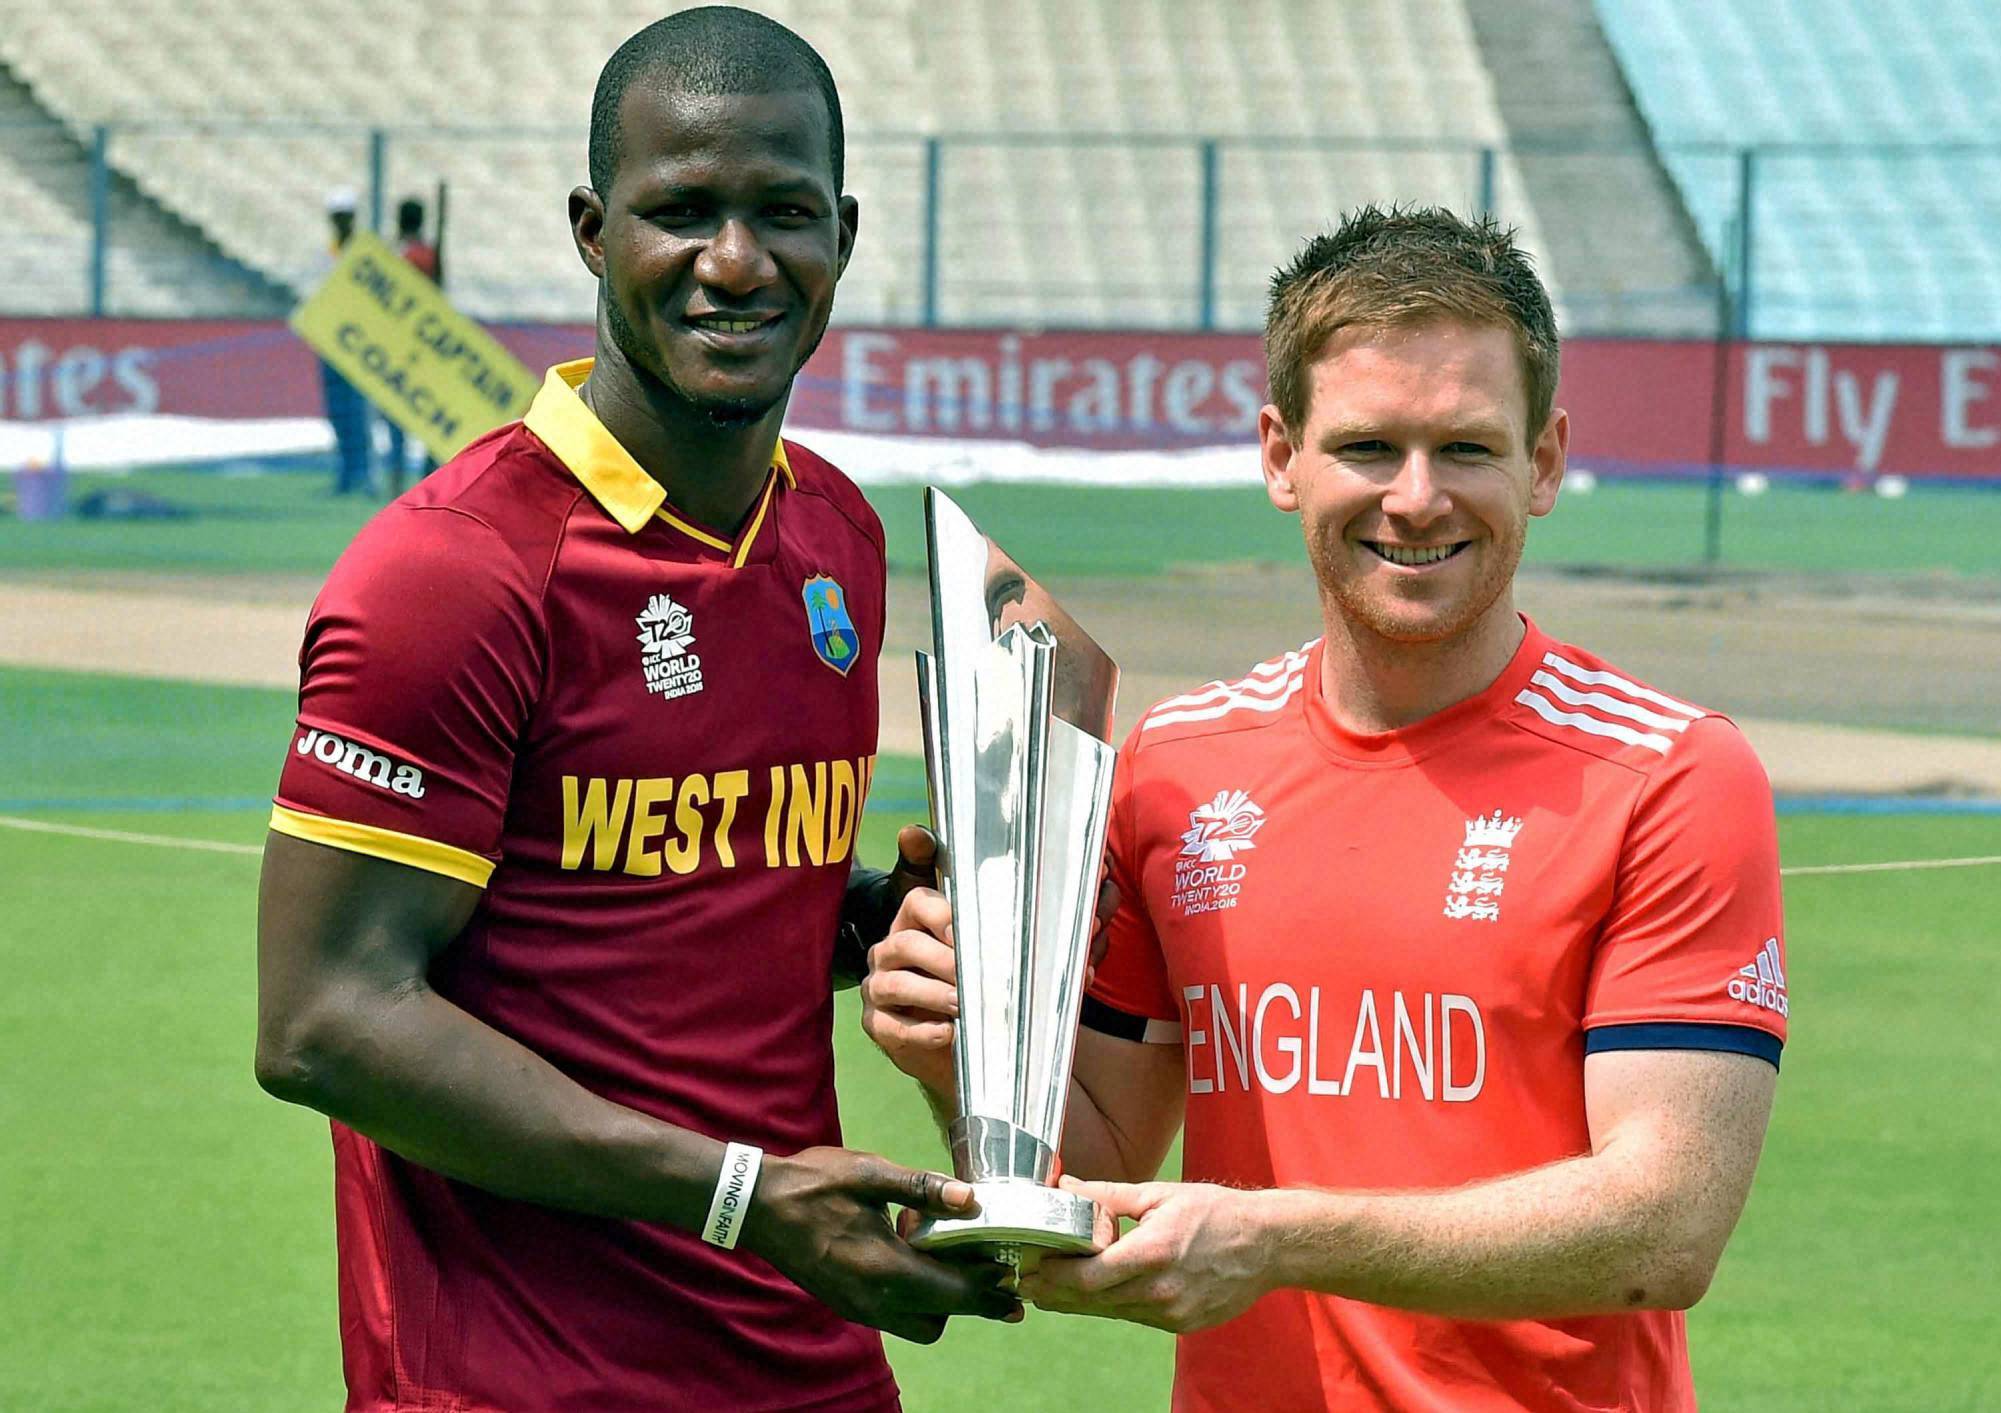 West Indies is not just about Gayle, says Morgan